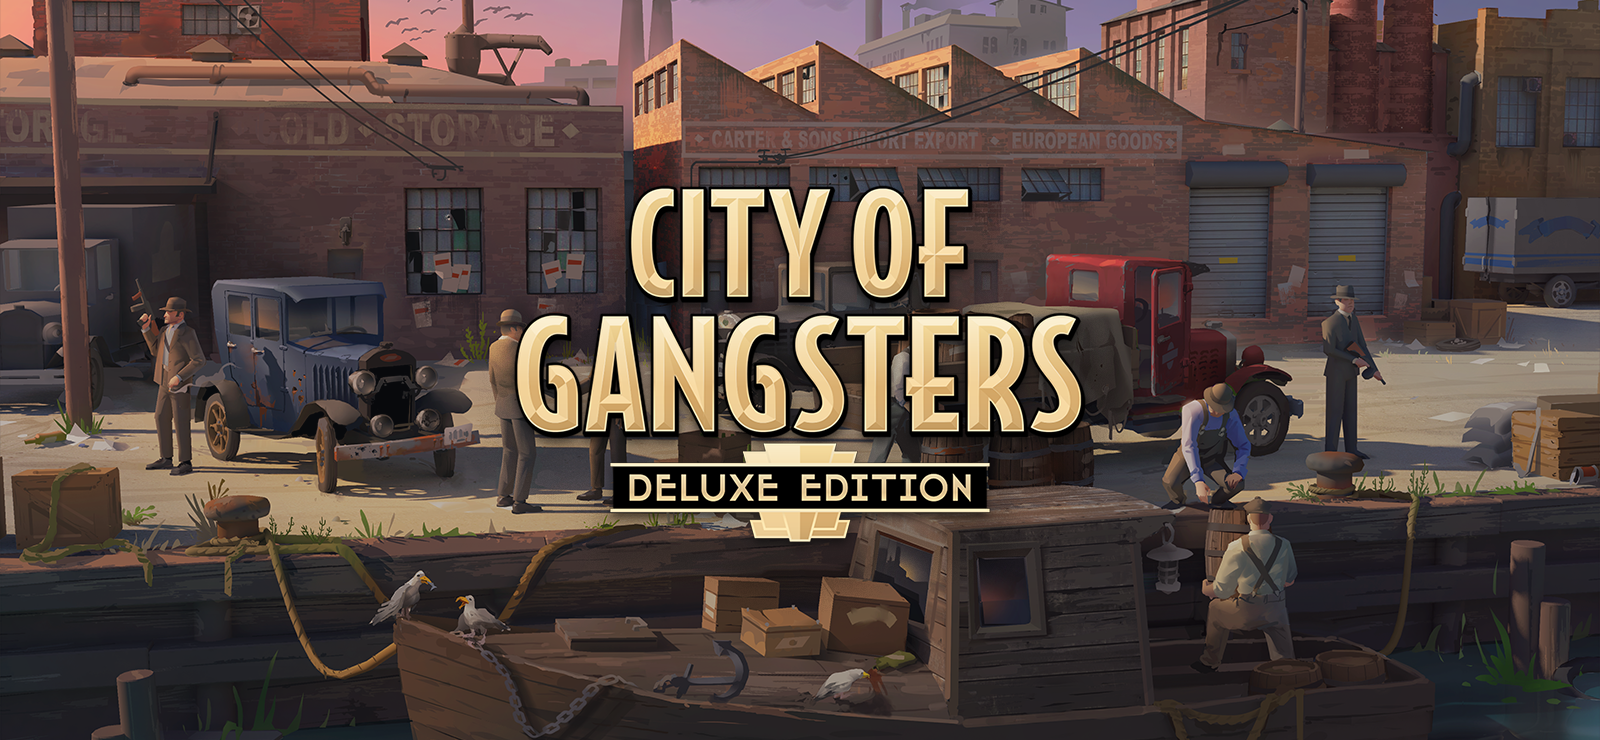 City Of Gangsters - Deluxe Edition